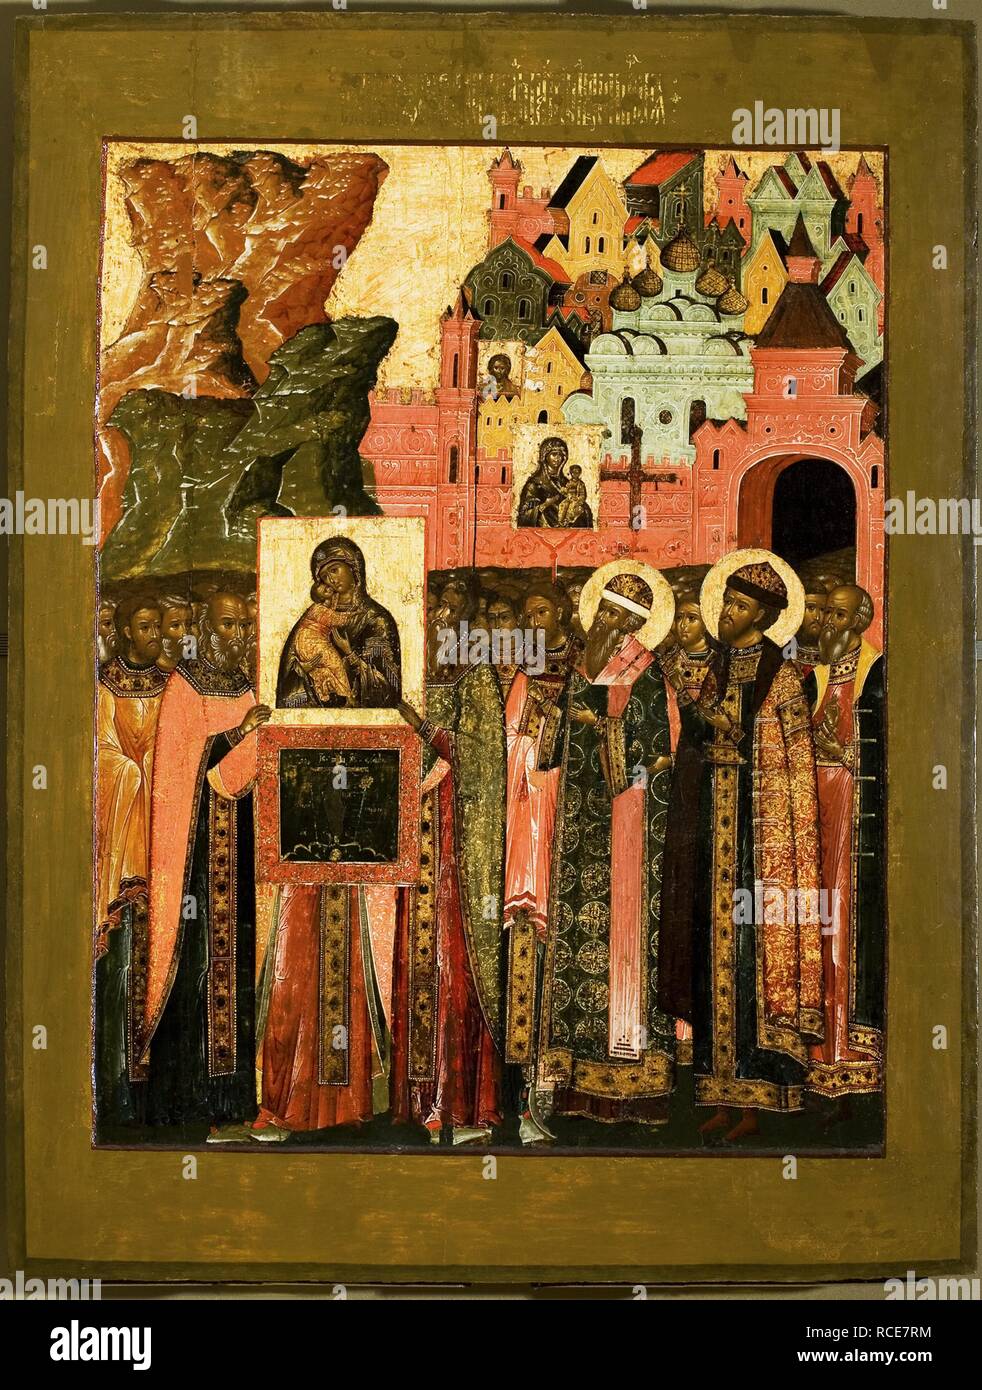 Arrival of the Icon of Our Lady of Vladimir in Moscow in 1395. Museum: State Tretyakov Gallery, Moscow. Author: Russian icon. Stock Photo